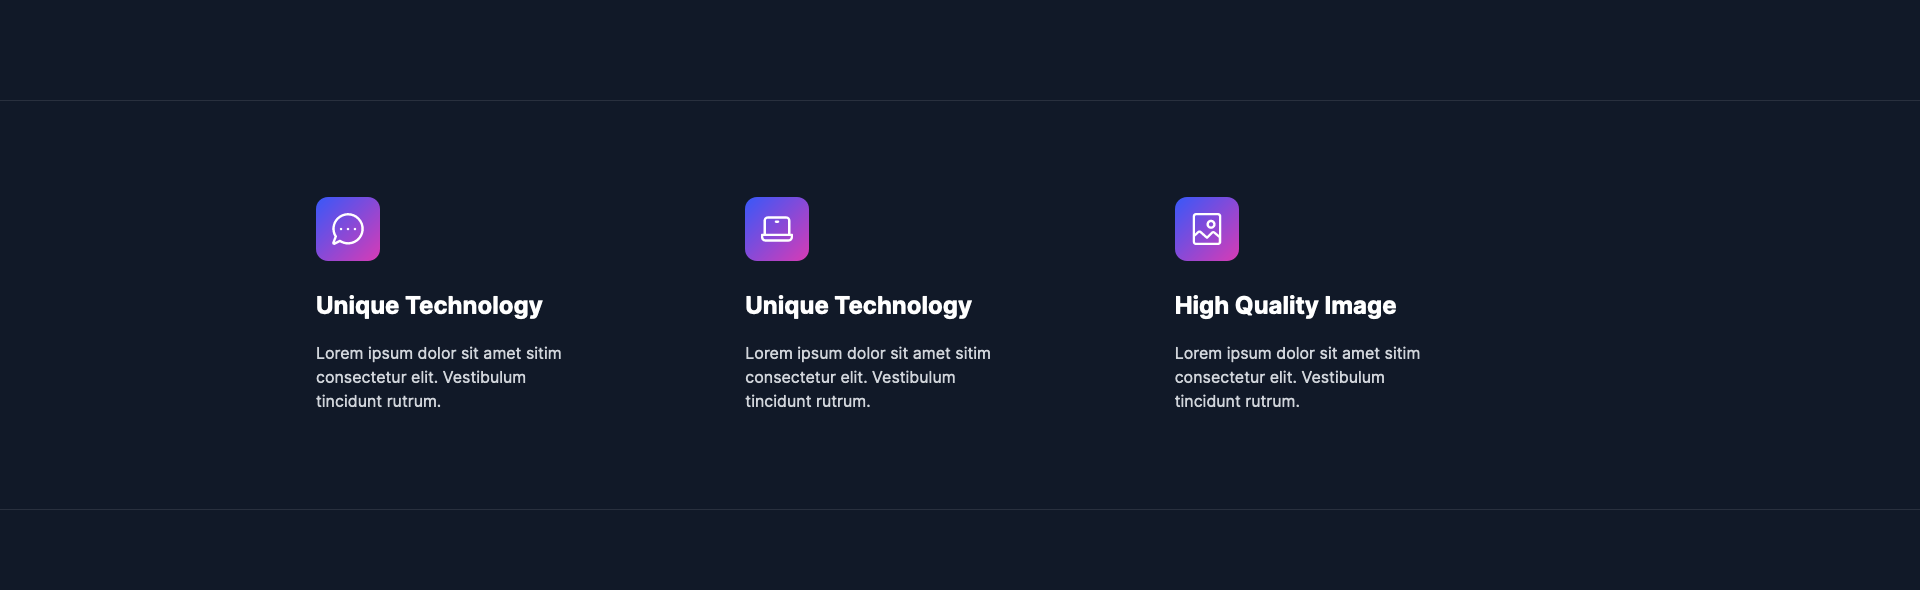 Service Highlights with Gradient Icon Backgrounds